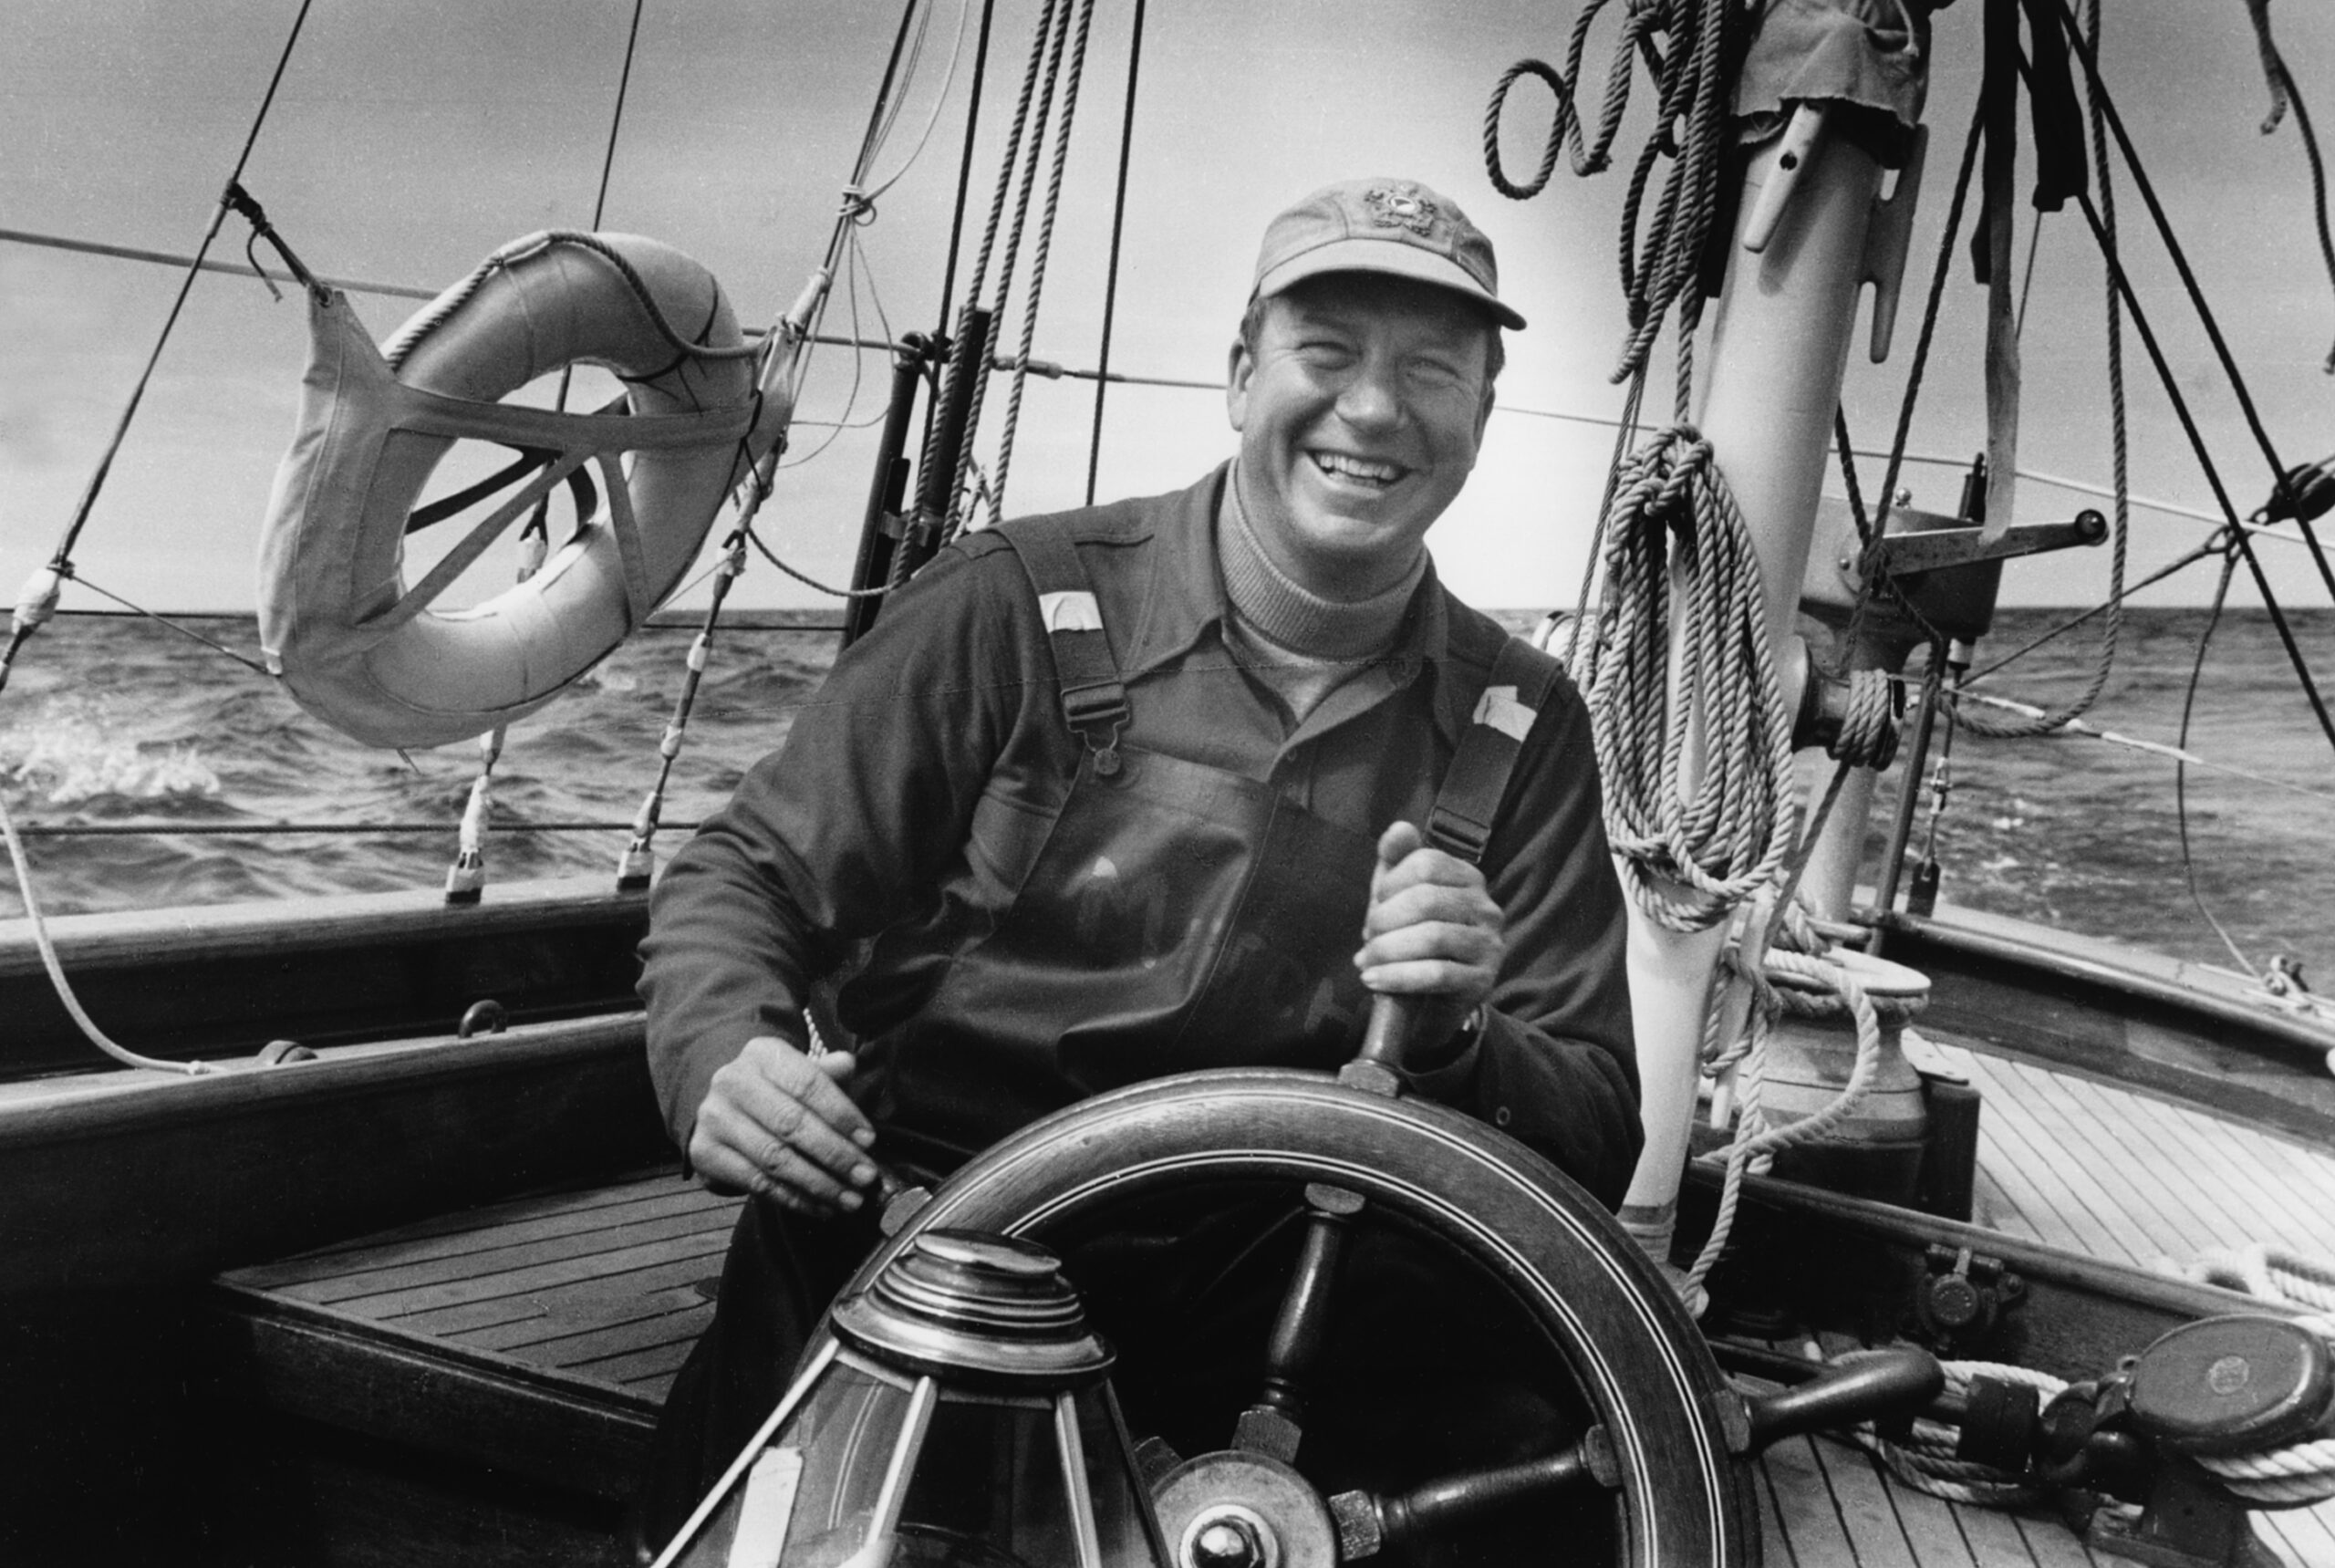 Carleton Mitchell at the helm of yawl yacht Carribbee while under sail during the Transatlantic Race from Bermuda to Plymouth, England, July 1952. Mystic Seaport Museum, Carleton Mitchell Collection, 1996.31.5388.14